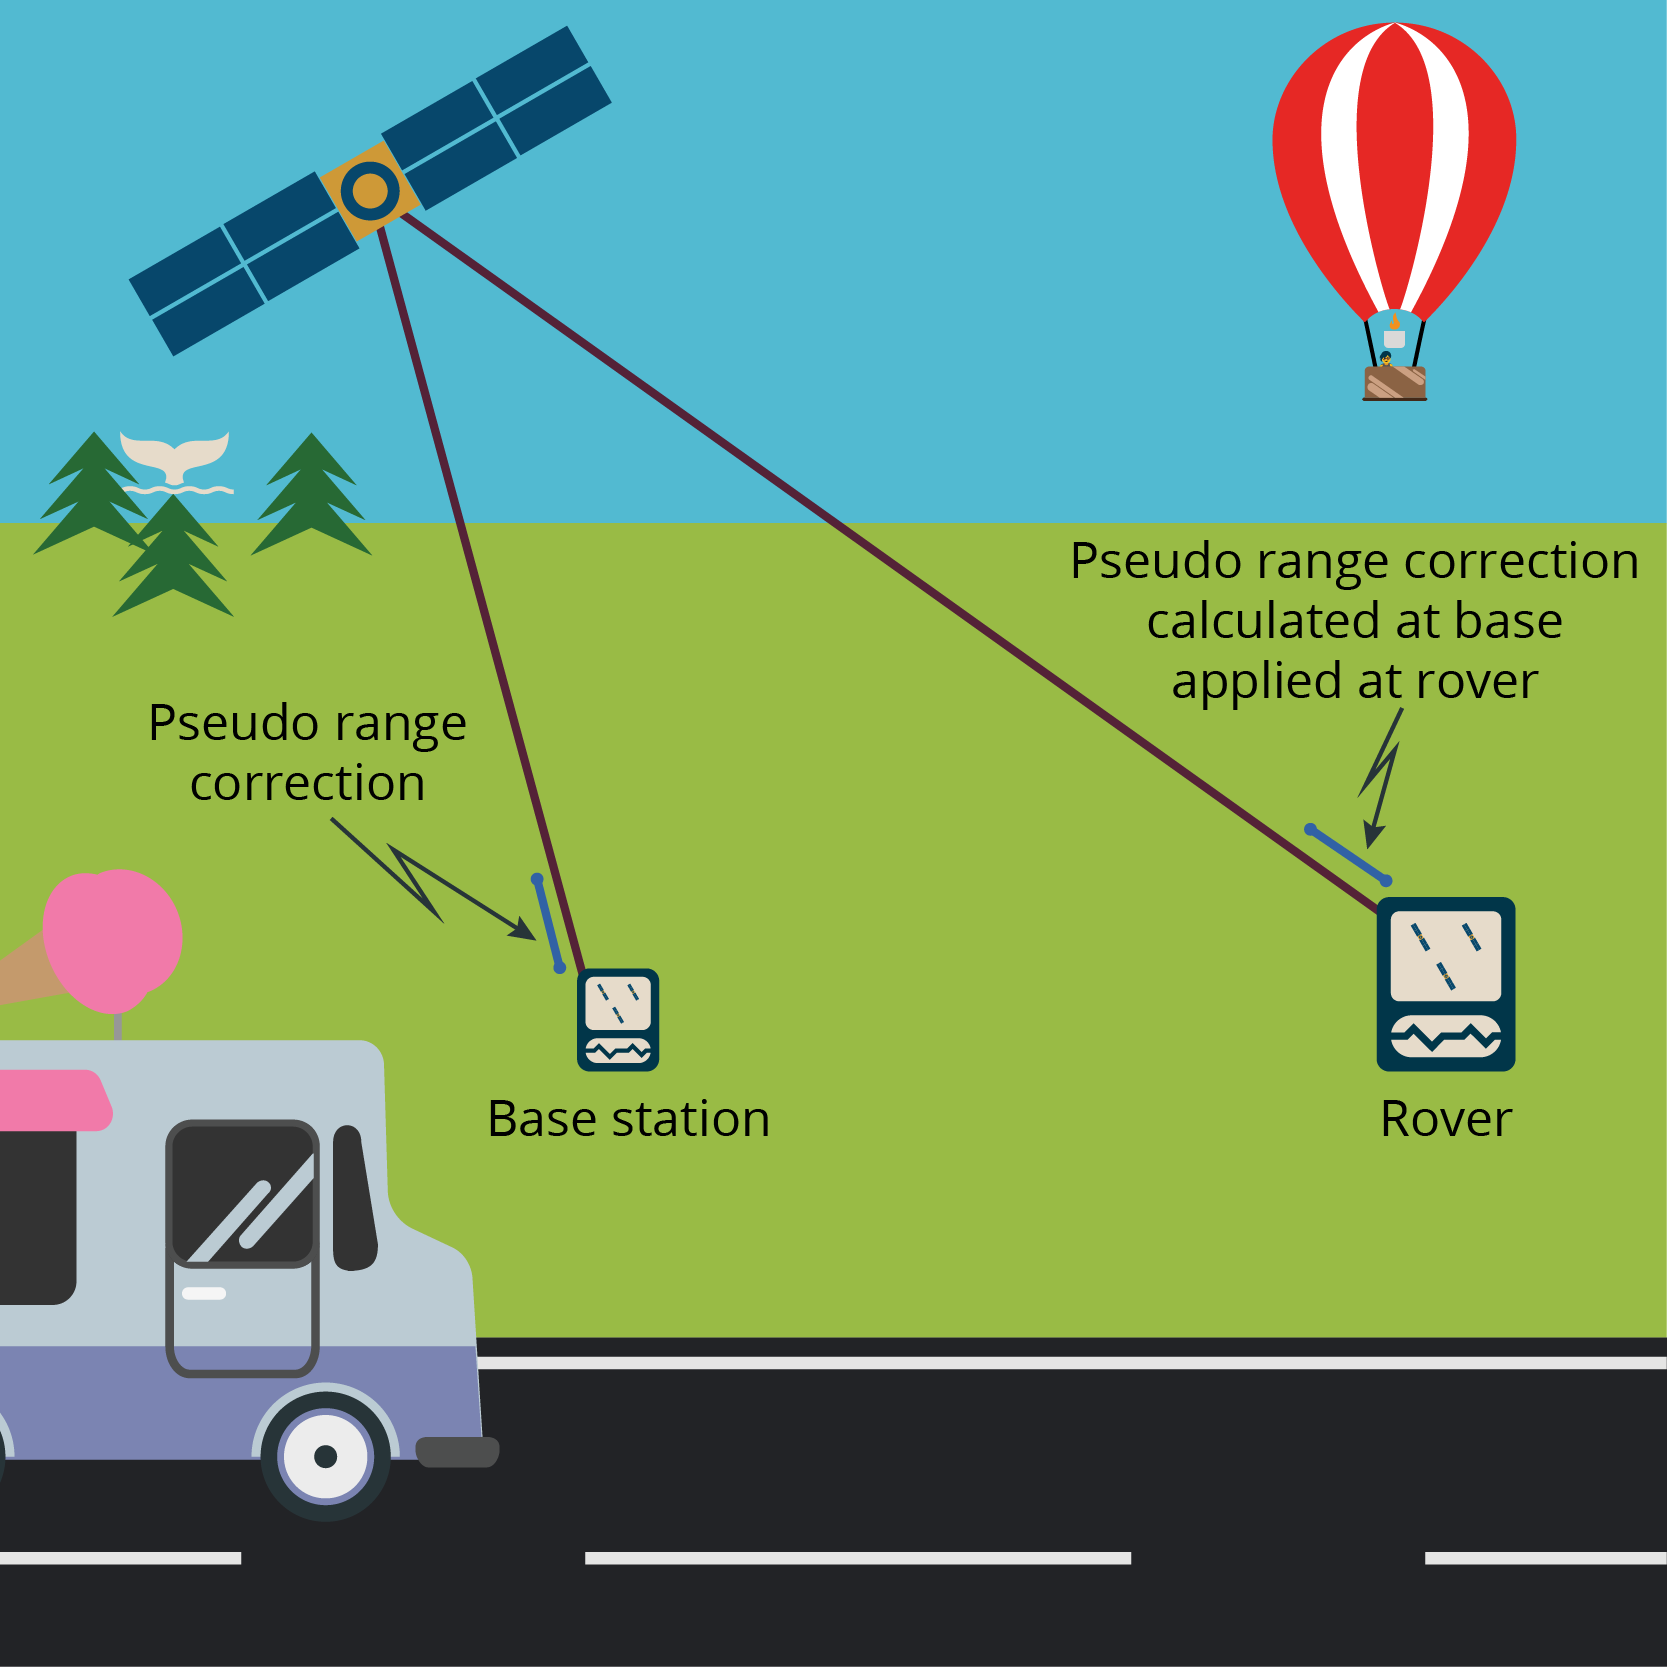 Diagram of Pseudo range correction represented with base station and rover